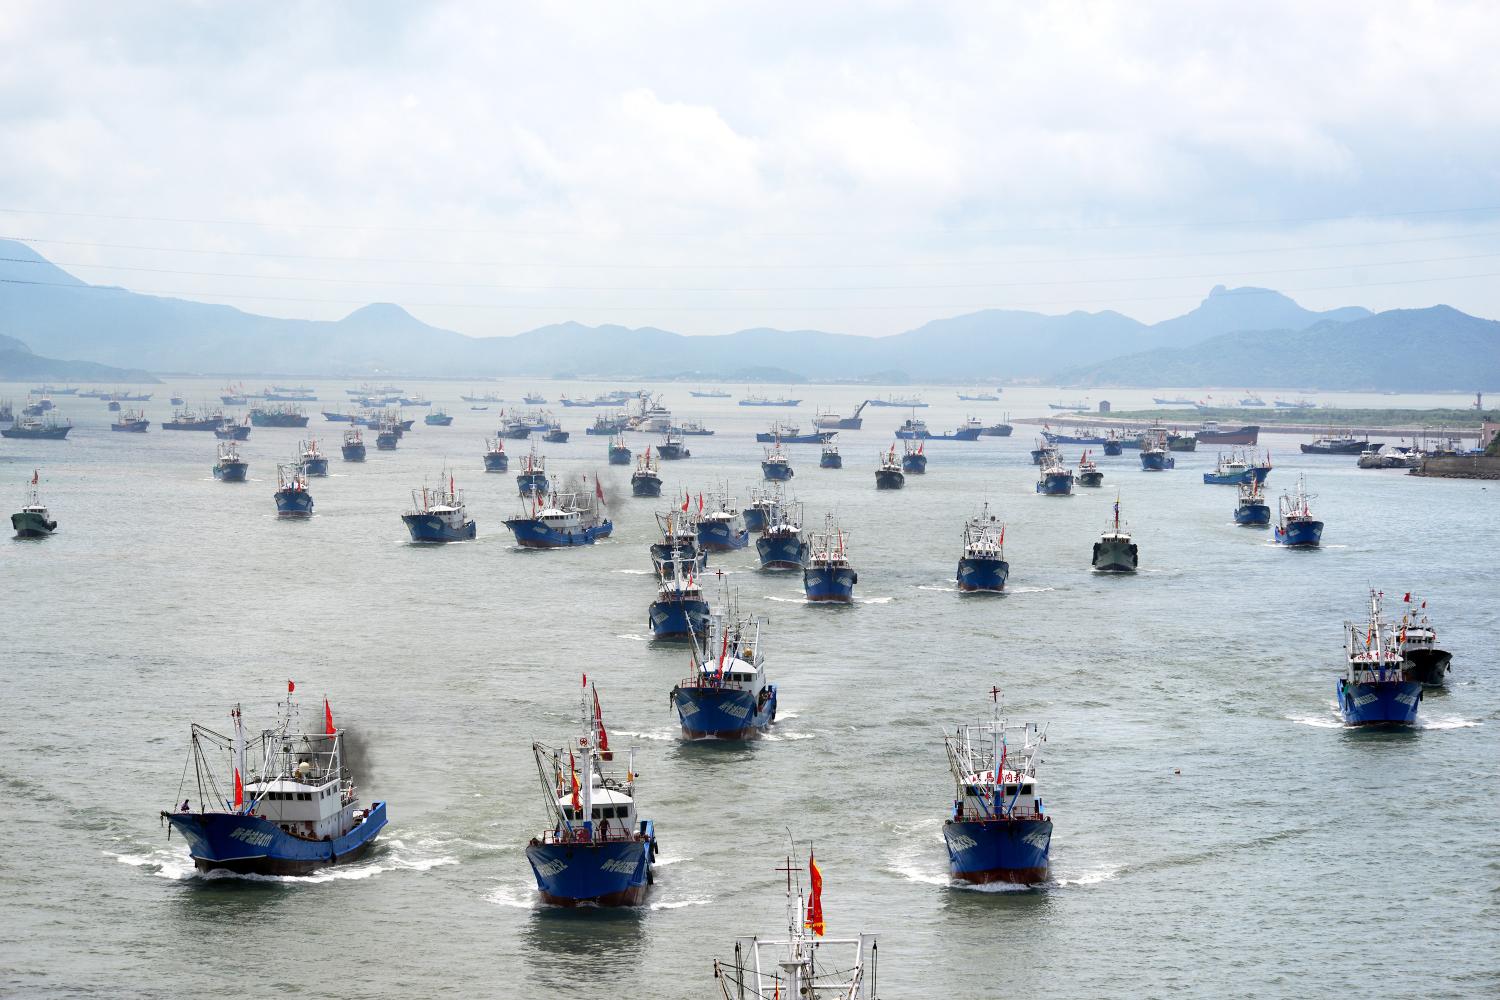 --FILE--A fishing fleet departs from a harbor after the summer fishing moratorium ended in Zhoushan city, east China's Zhejiang province, 1 August 2016.Overfishing in Chinese rivers and seas has seriously depleted stocks and the government is to cut the size of the nation's fishing fleet, the agricultural ministry said. The ministry said there were practically "no fish" in the coastal East China Sea and fishermen also had a hard time finding a catch in many other coastal waters, according to a state radio report on Sunday (14 August 2016). Agriculture minister Han Changfu told China National Radio that it was time to trim China's fishing industry, now booming with the world's largest fishing fleet, to protect fish stocks.No Use China. No Use France.